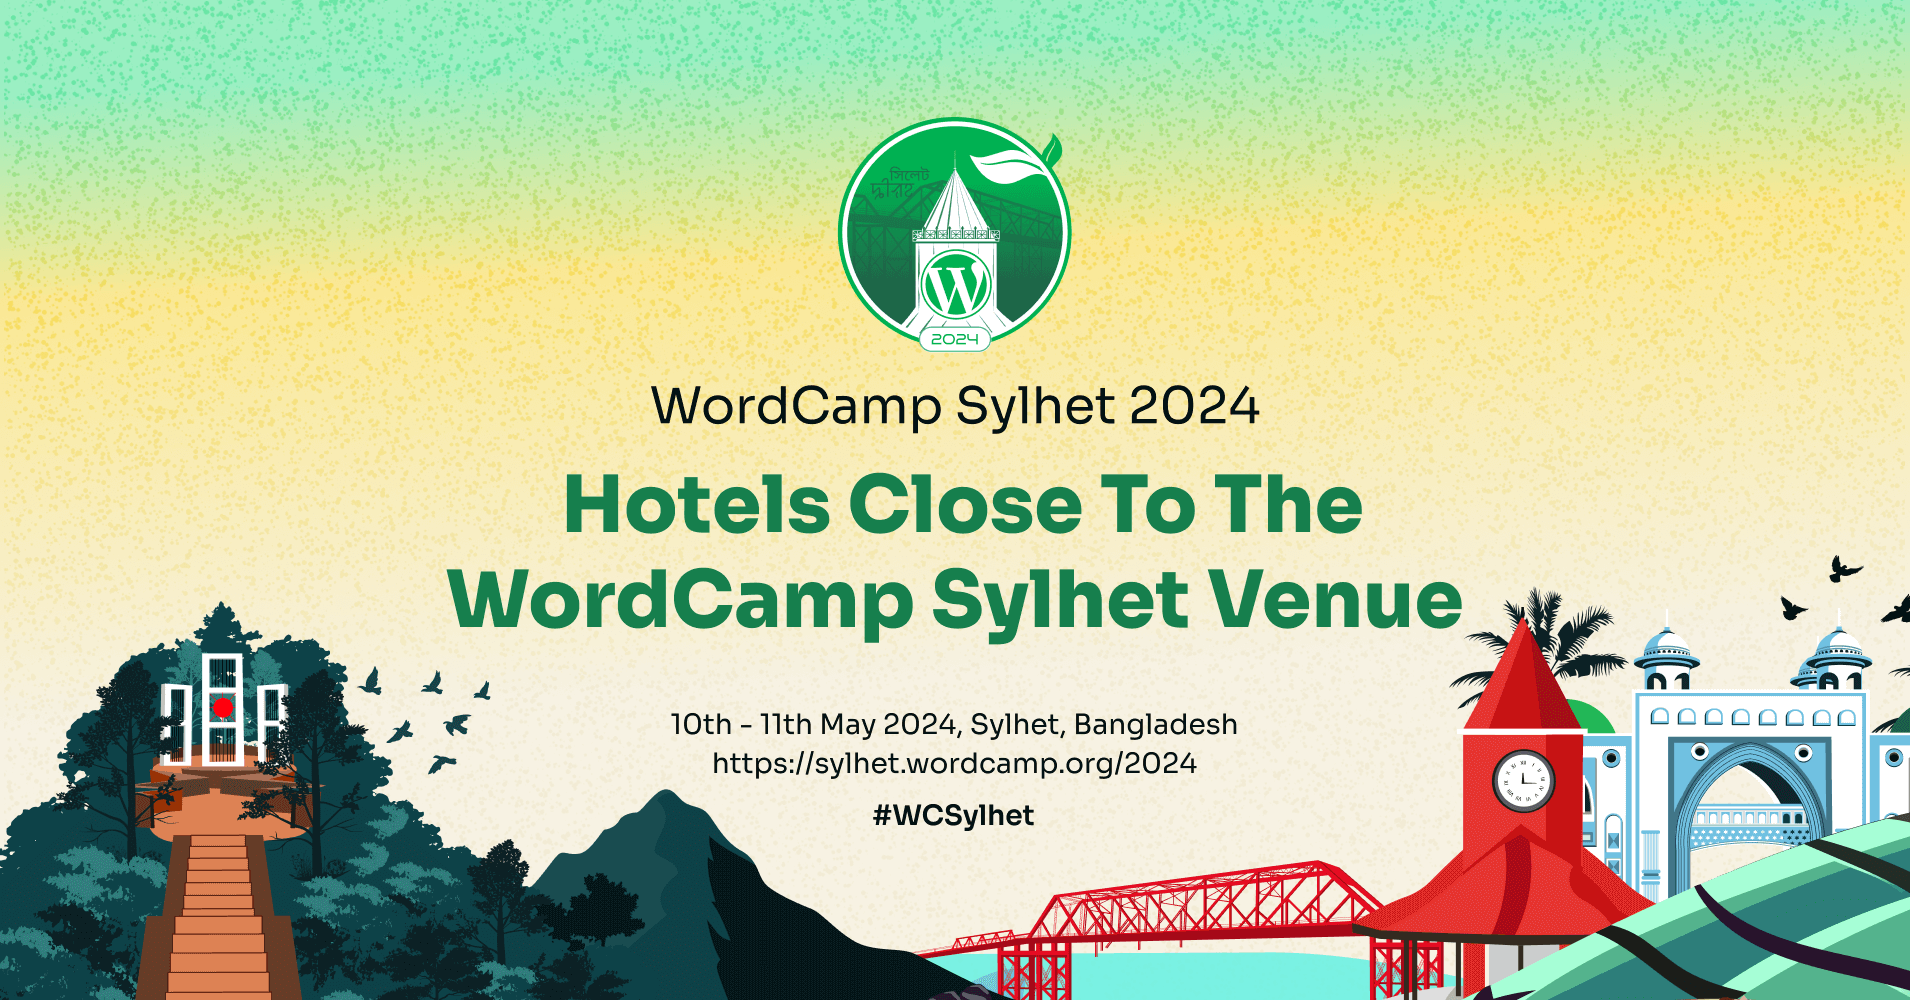 Hotels close to the WordCamp Sylhet venue: Book your room ASAP!